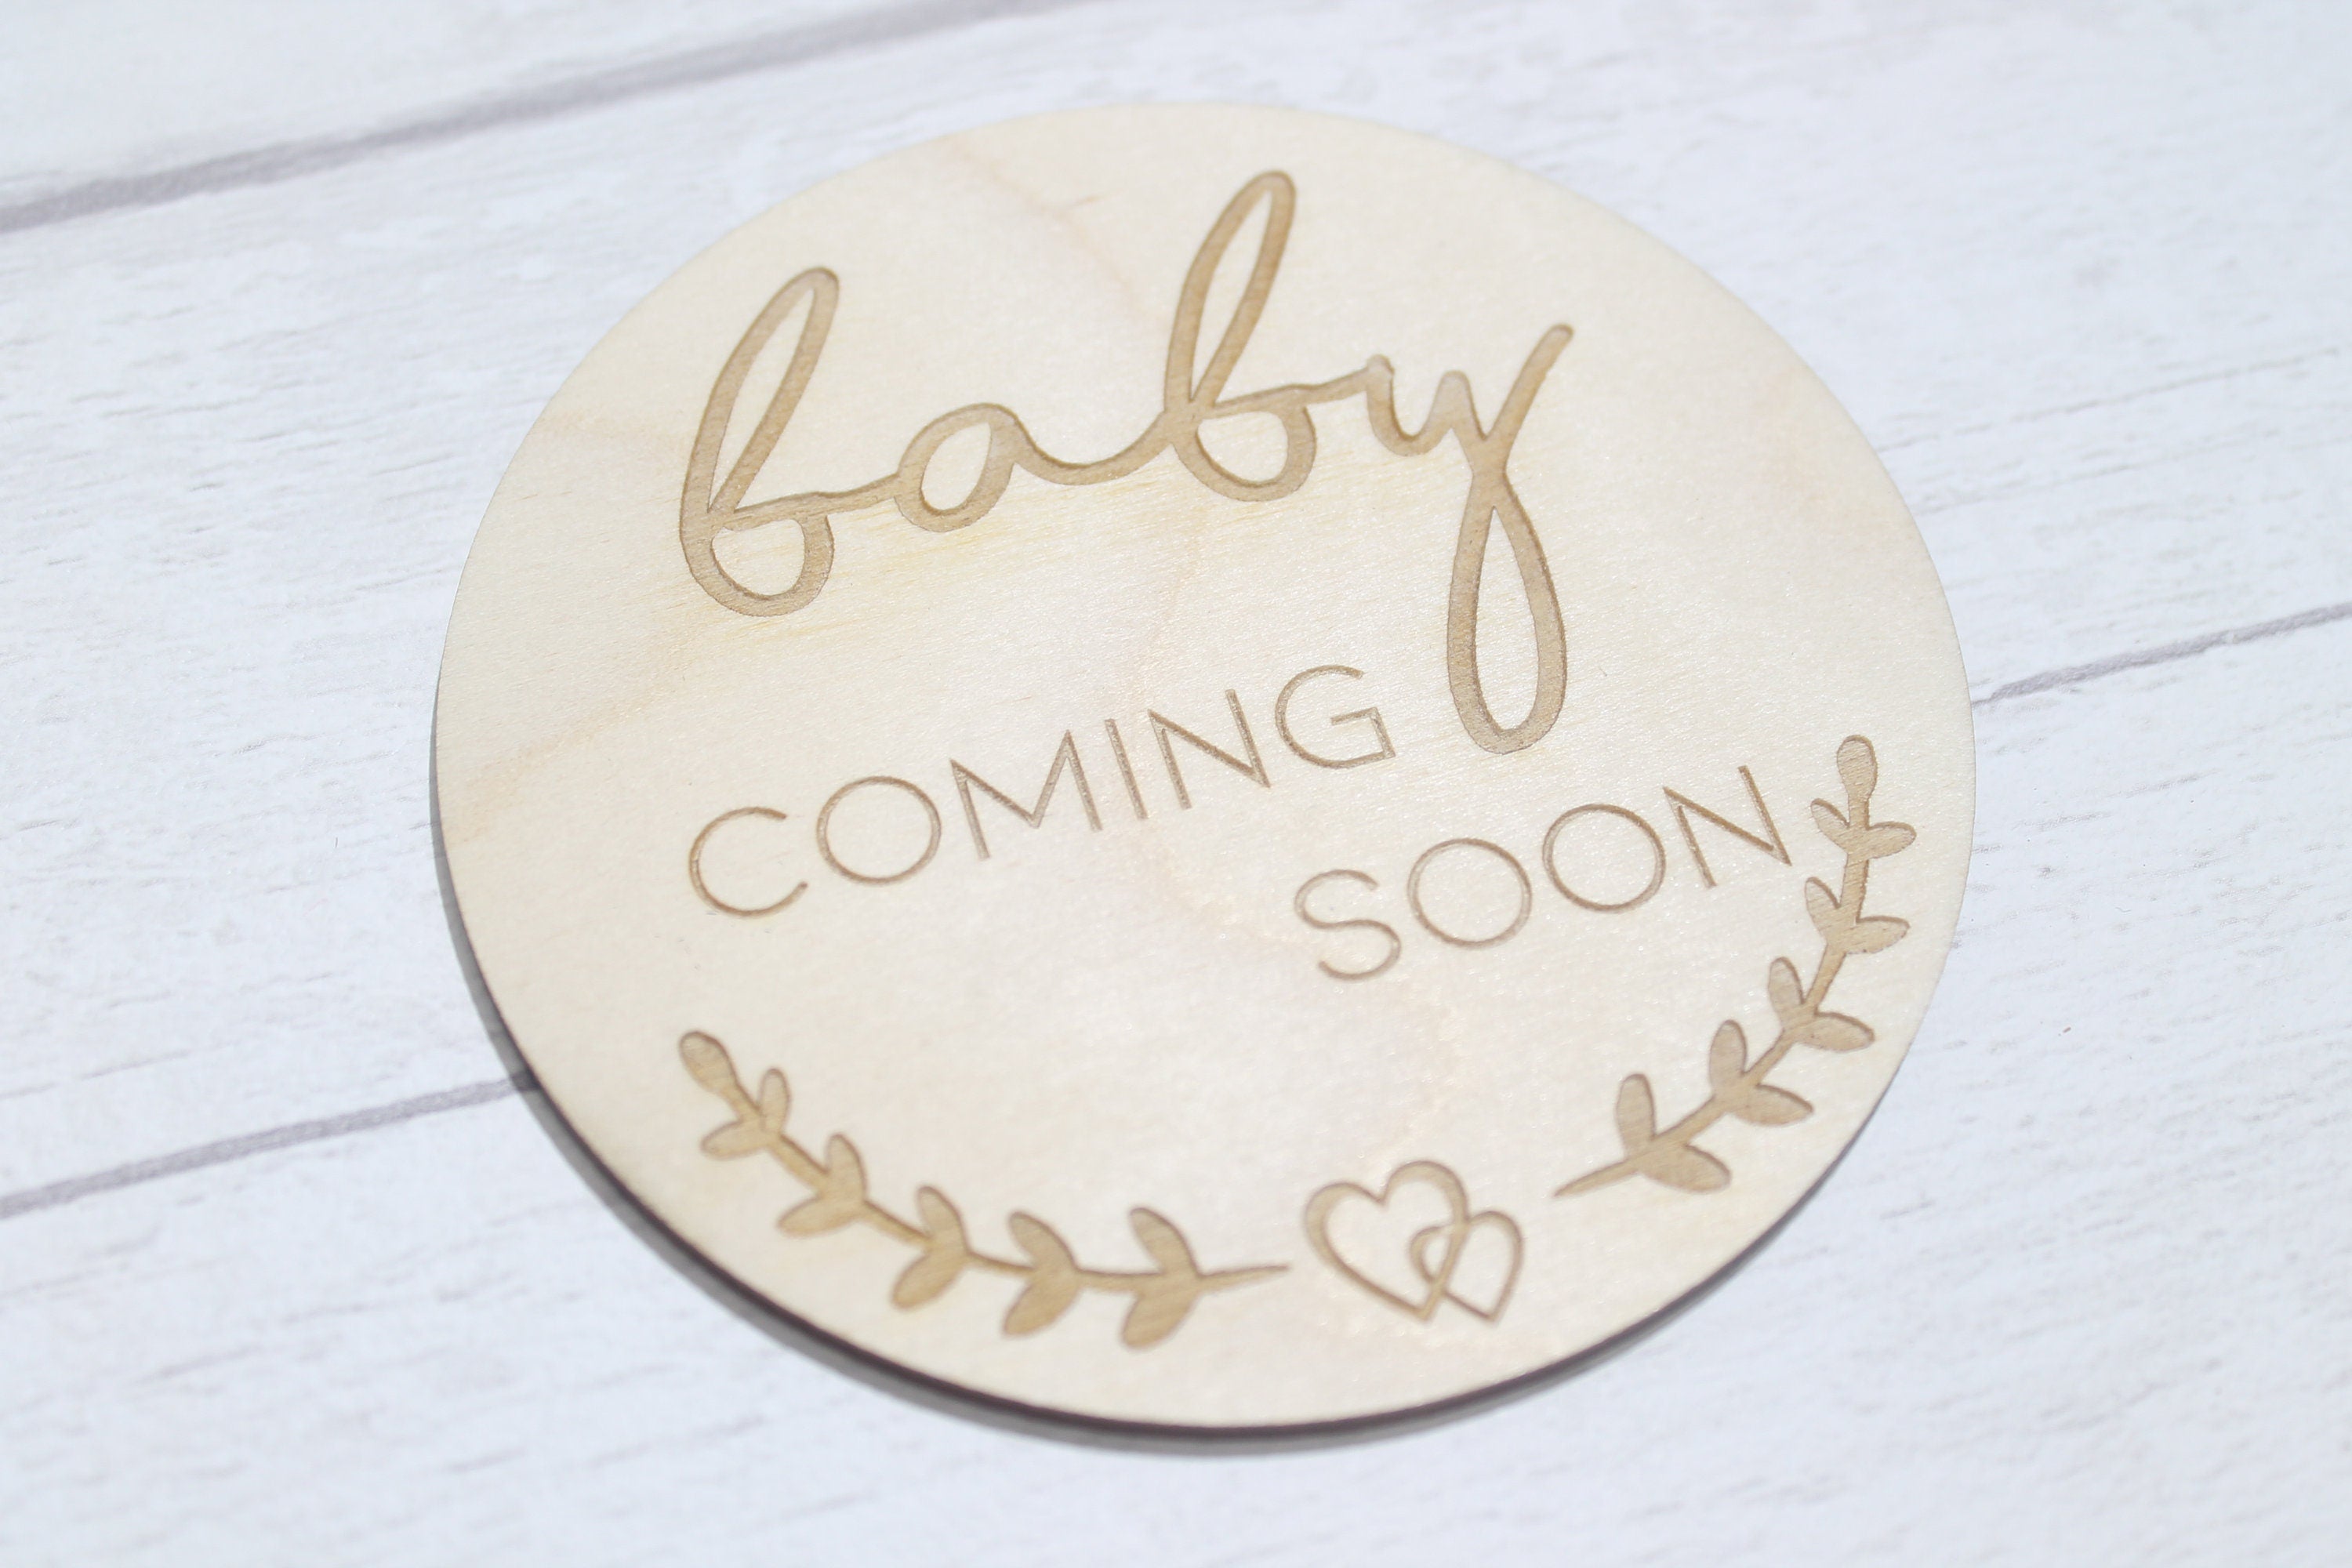 New Baby Announcement Cards  Set of 4 - Hello World New Baby Gift - New Baby Photo Prop - Parent To Be or Baby Shower Gift - Milestone Disc